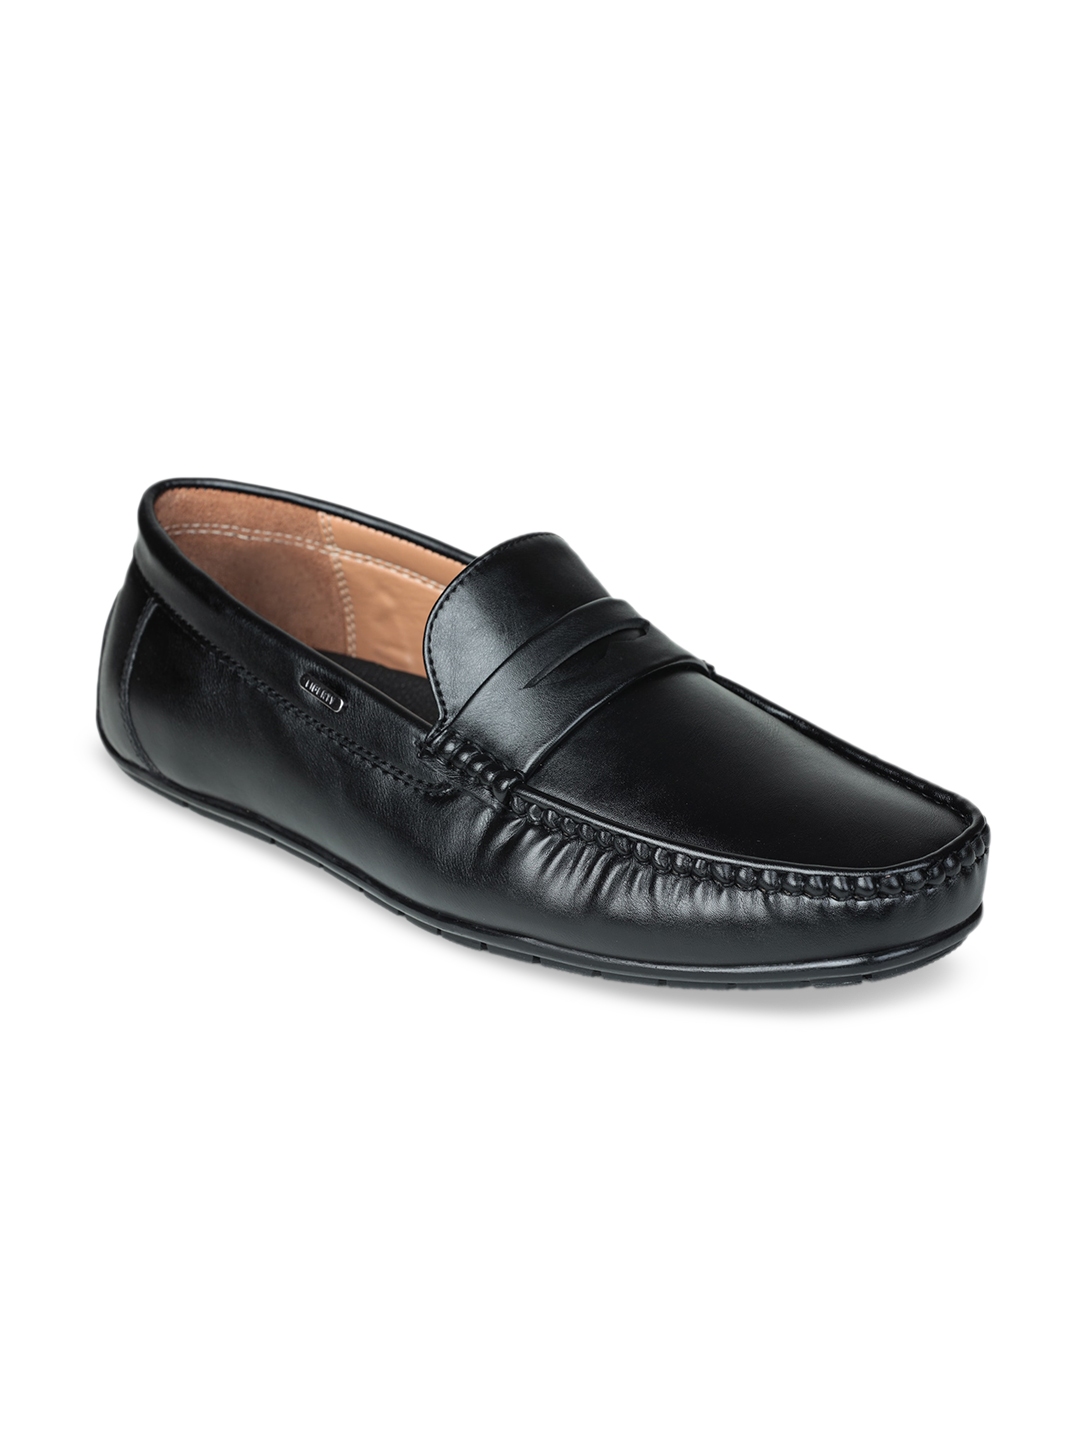 Buy Liberty Men Black Loafers - Casual Shoes for Men 14810144 | Myntra